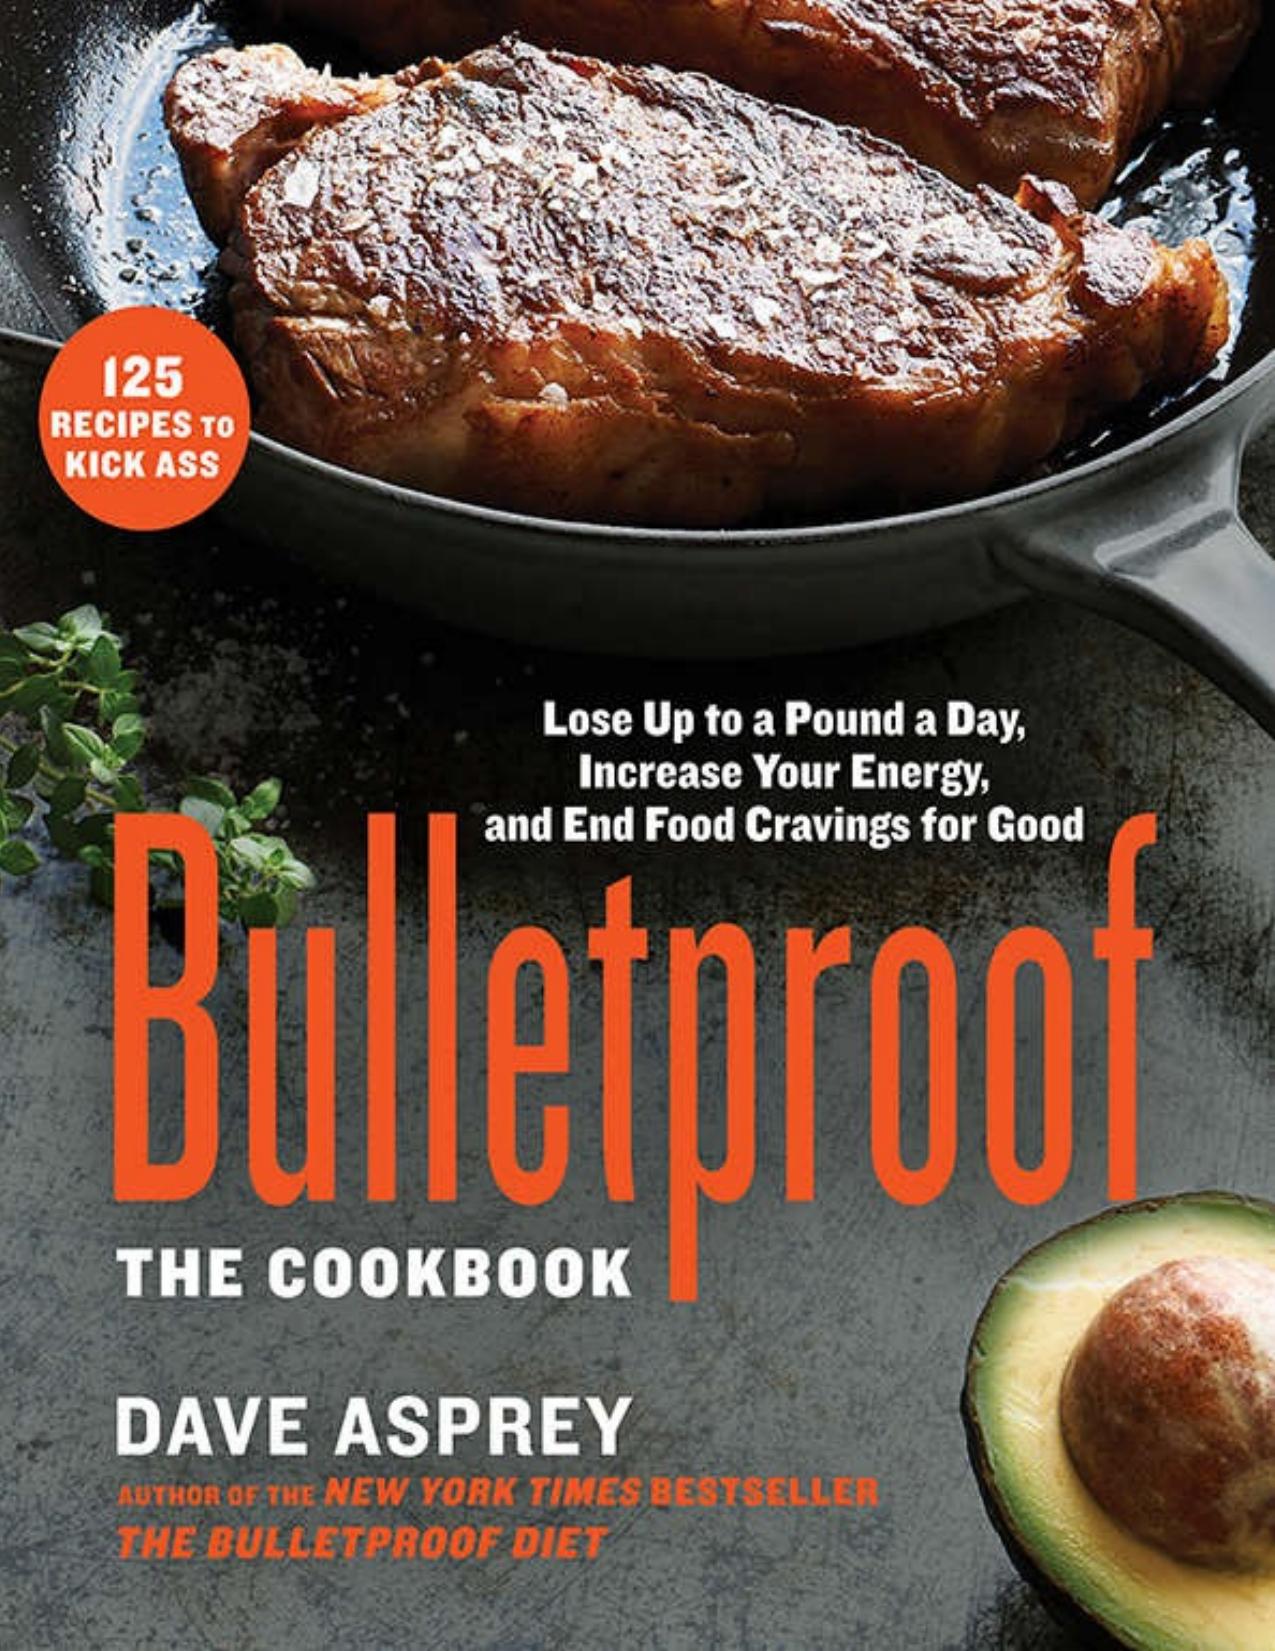 Bulletproof: The Cookbook:Â Lose Up to a Pound a Day, Increase Your Energy, and End Food Cravings for Good by Dave Asprey